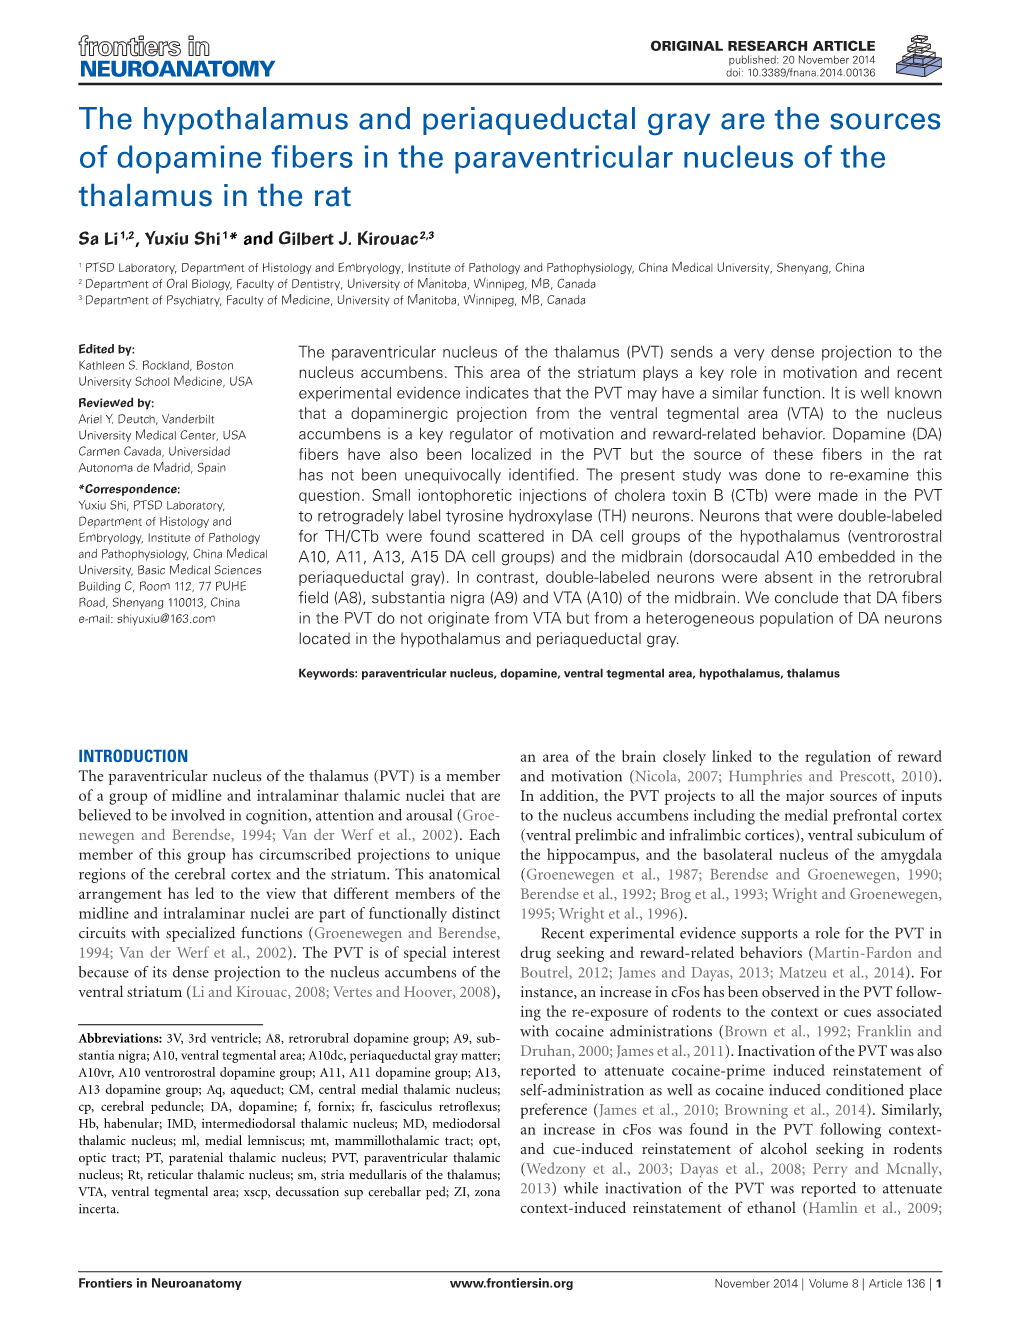 The Hypothalamus and Periaqueductal Gray Are the Sources of Dopamine Fibers in the Paraventricular Nucleus of the Thalamus in Th